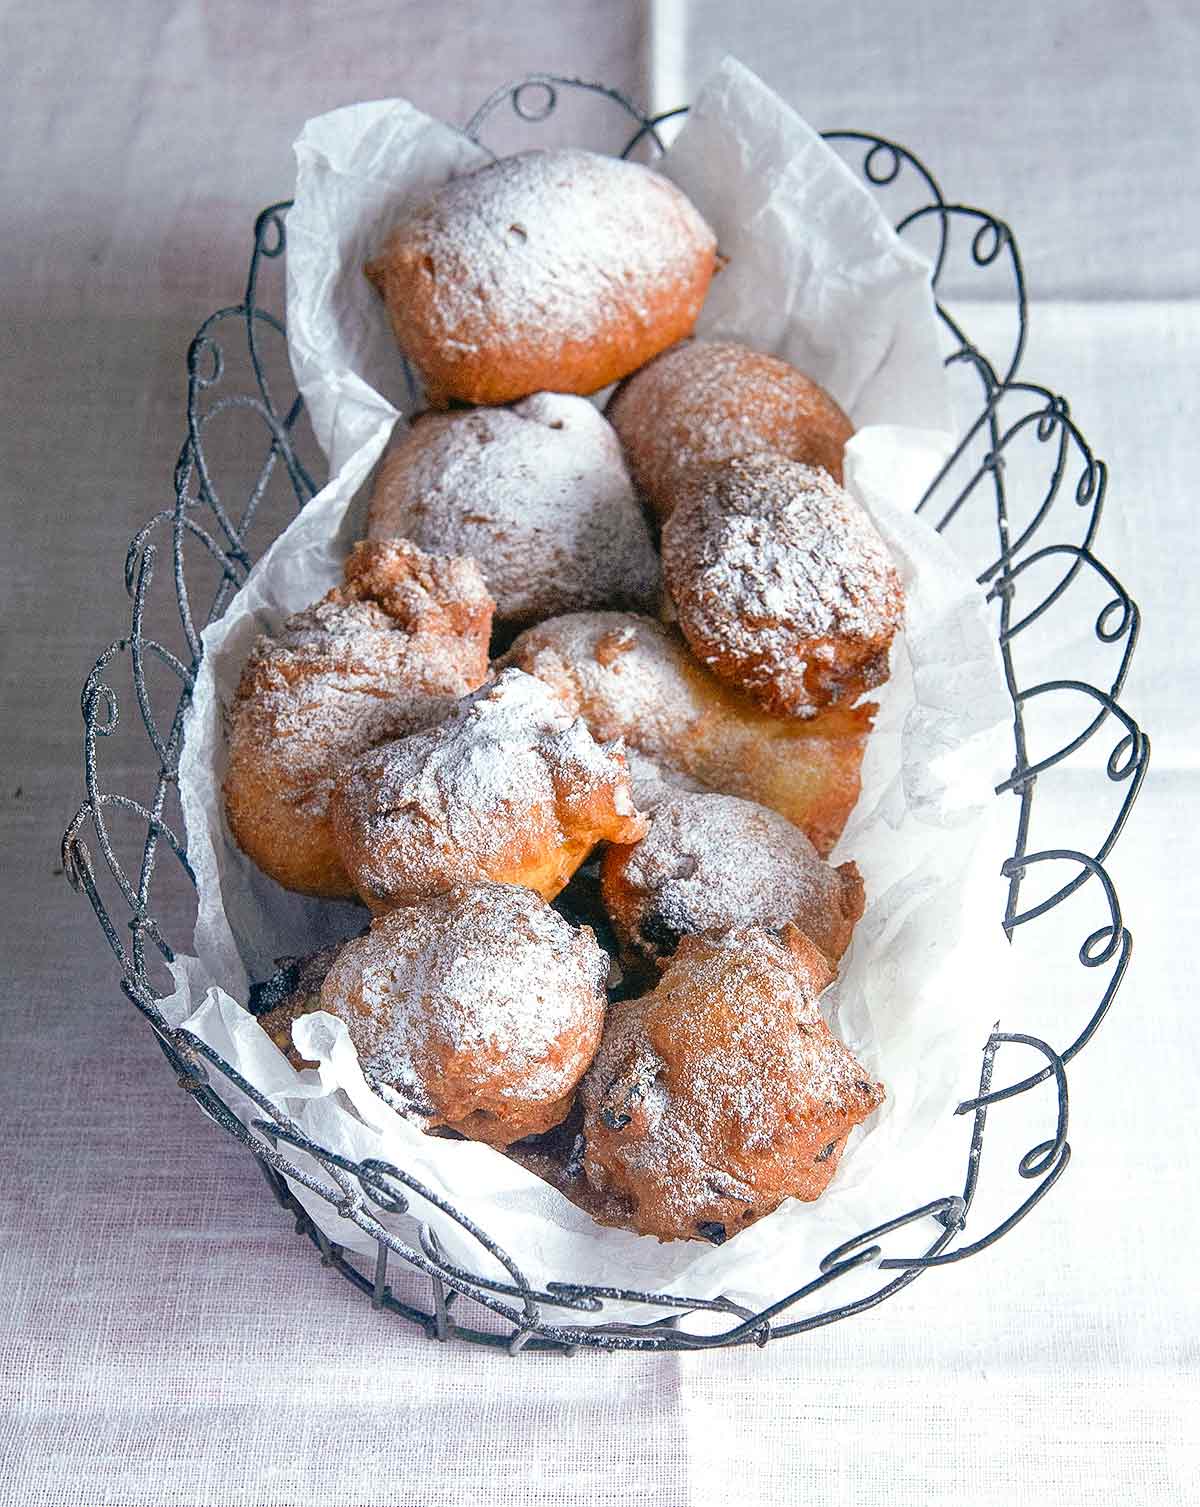 Oliebollen or Dutch doughnuts, in a wire basket, covered with powdered sugar on a white tablecloth.